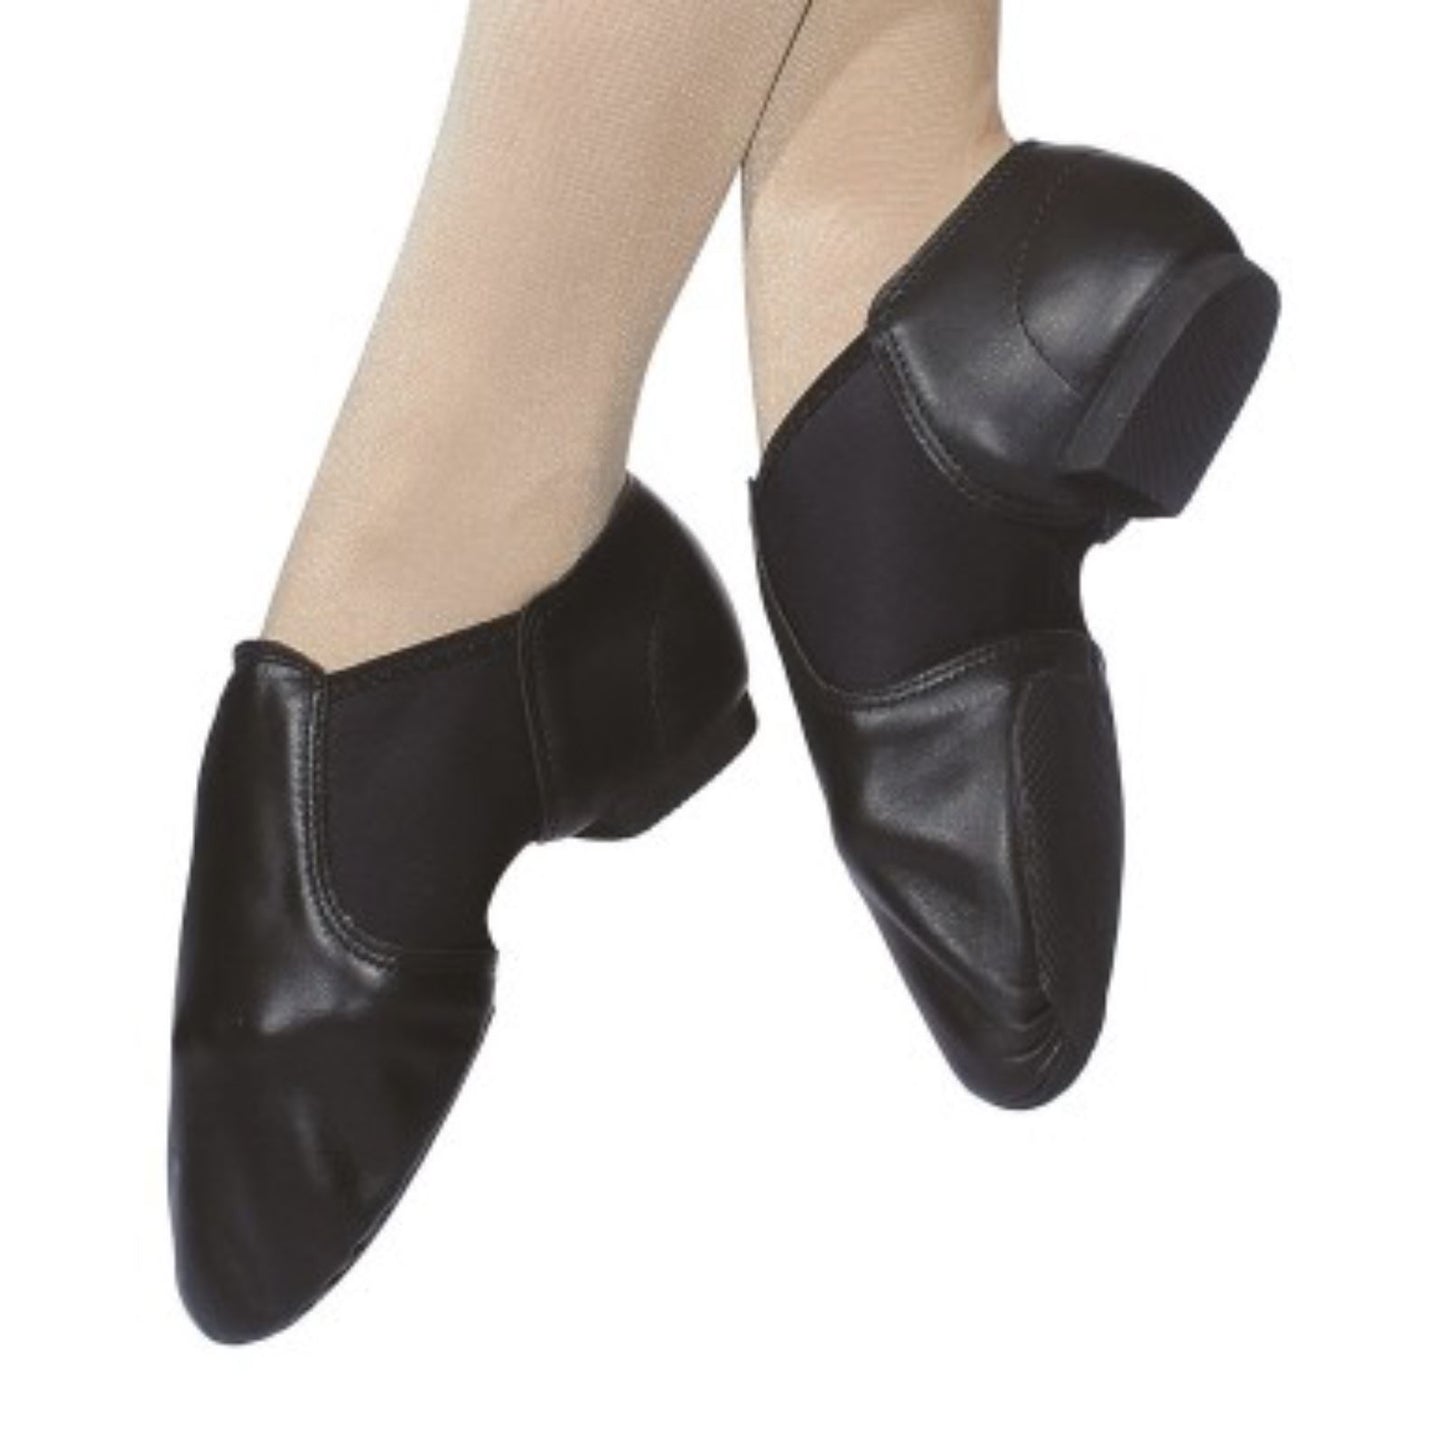 ROCH VALLEY RVNEO LEATHER SPLIT SOLE JAZZ SHOES Dance Shoes Roch Valley Black Junior 10 